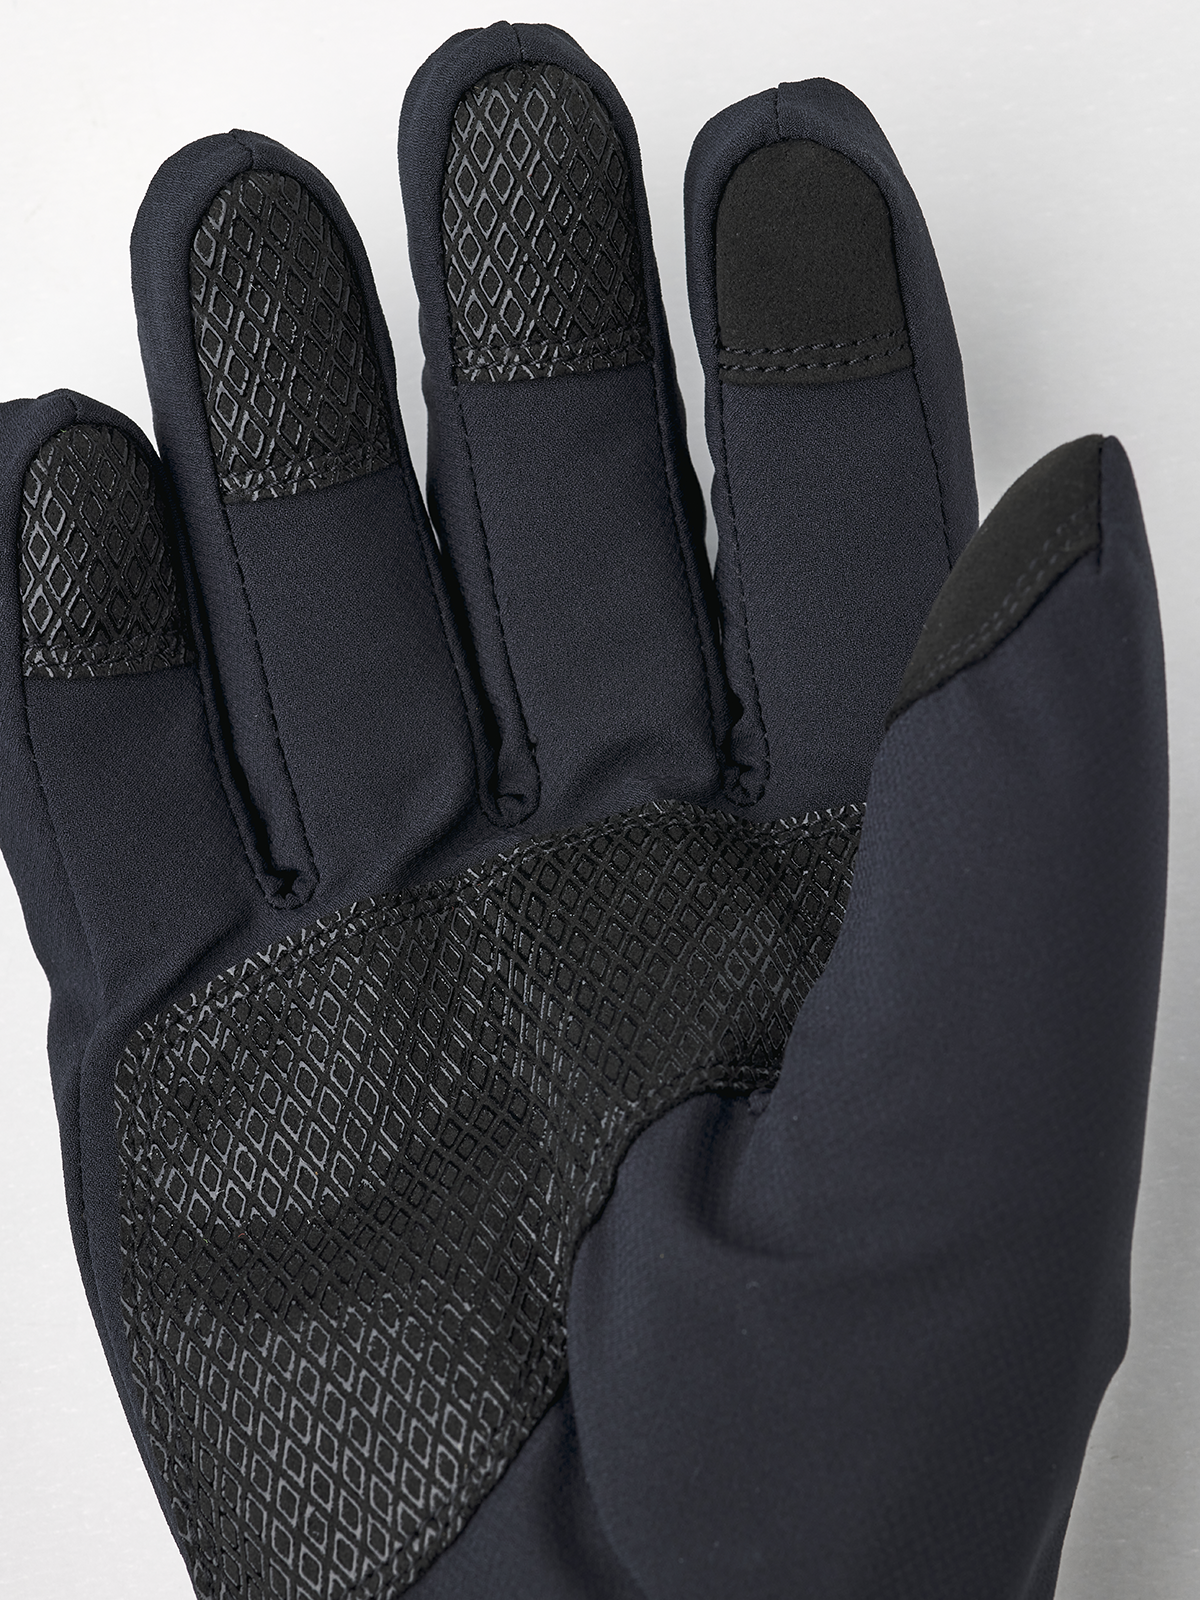 Womens Mens Accessories Mens Gloves Hestra Synthetic Czone Contact Pick Up Mens Glove in Black 